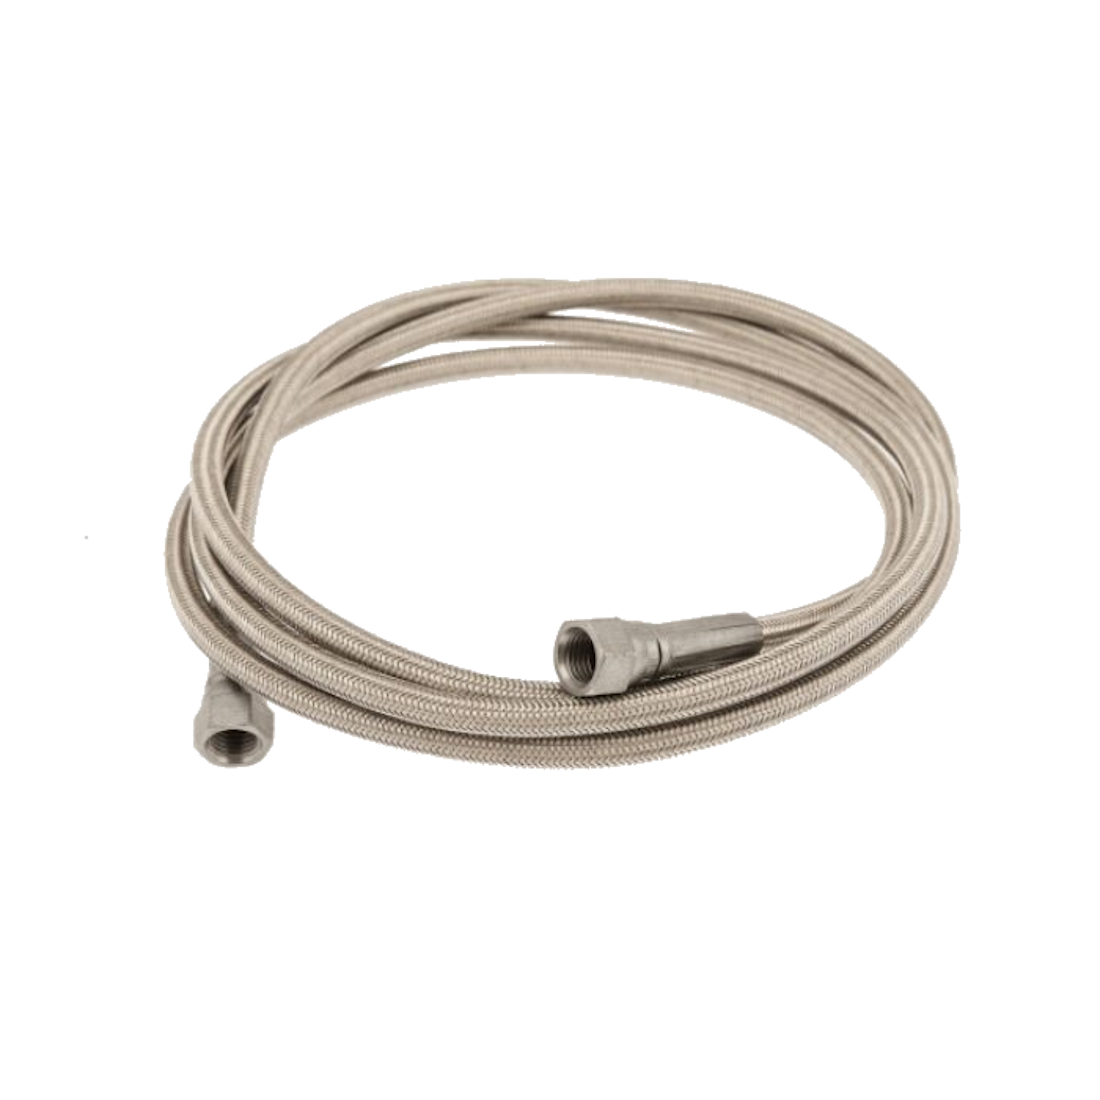 ARB Hose Stainless Steel braided PTFE reinforced JIC-04